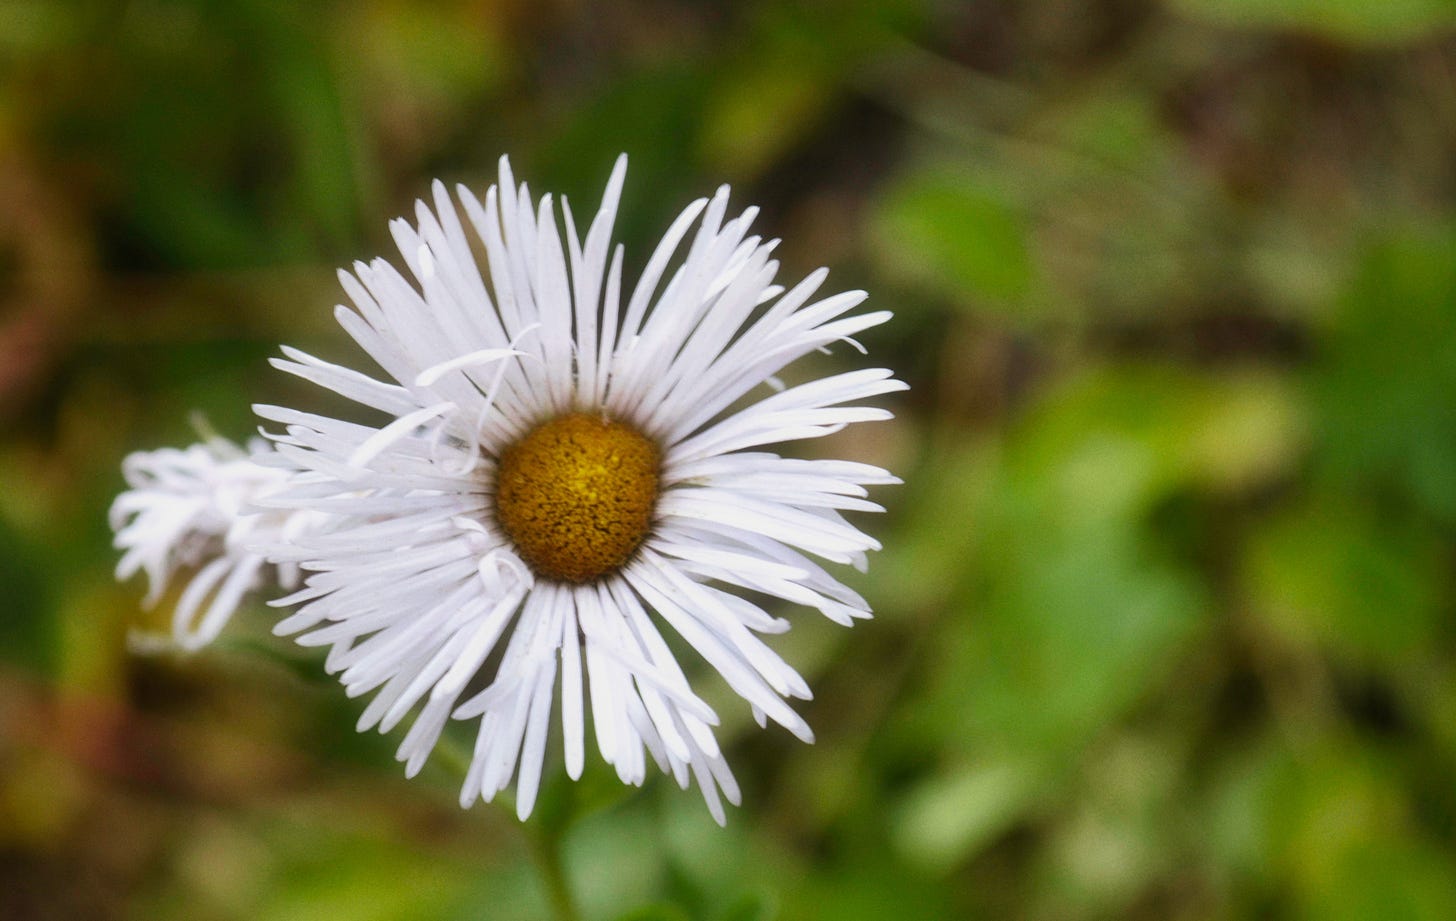 A single white wildflower with a dark yellow center. The petals are thin strips of white, fluffy, and full